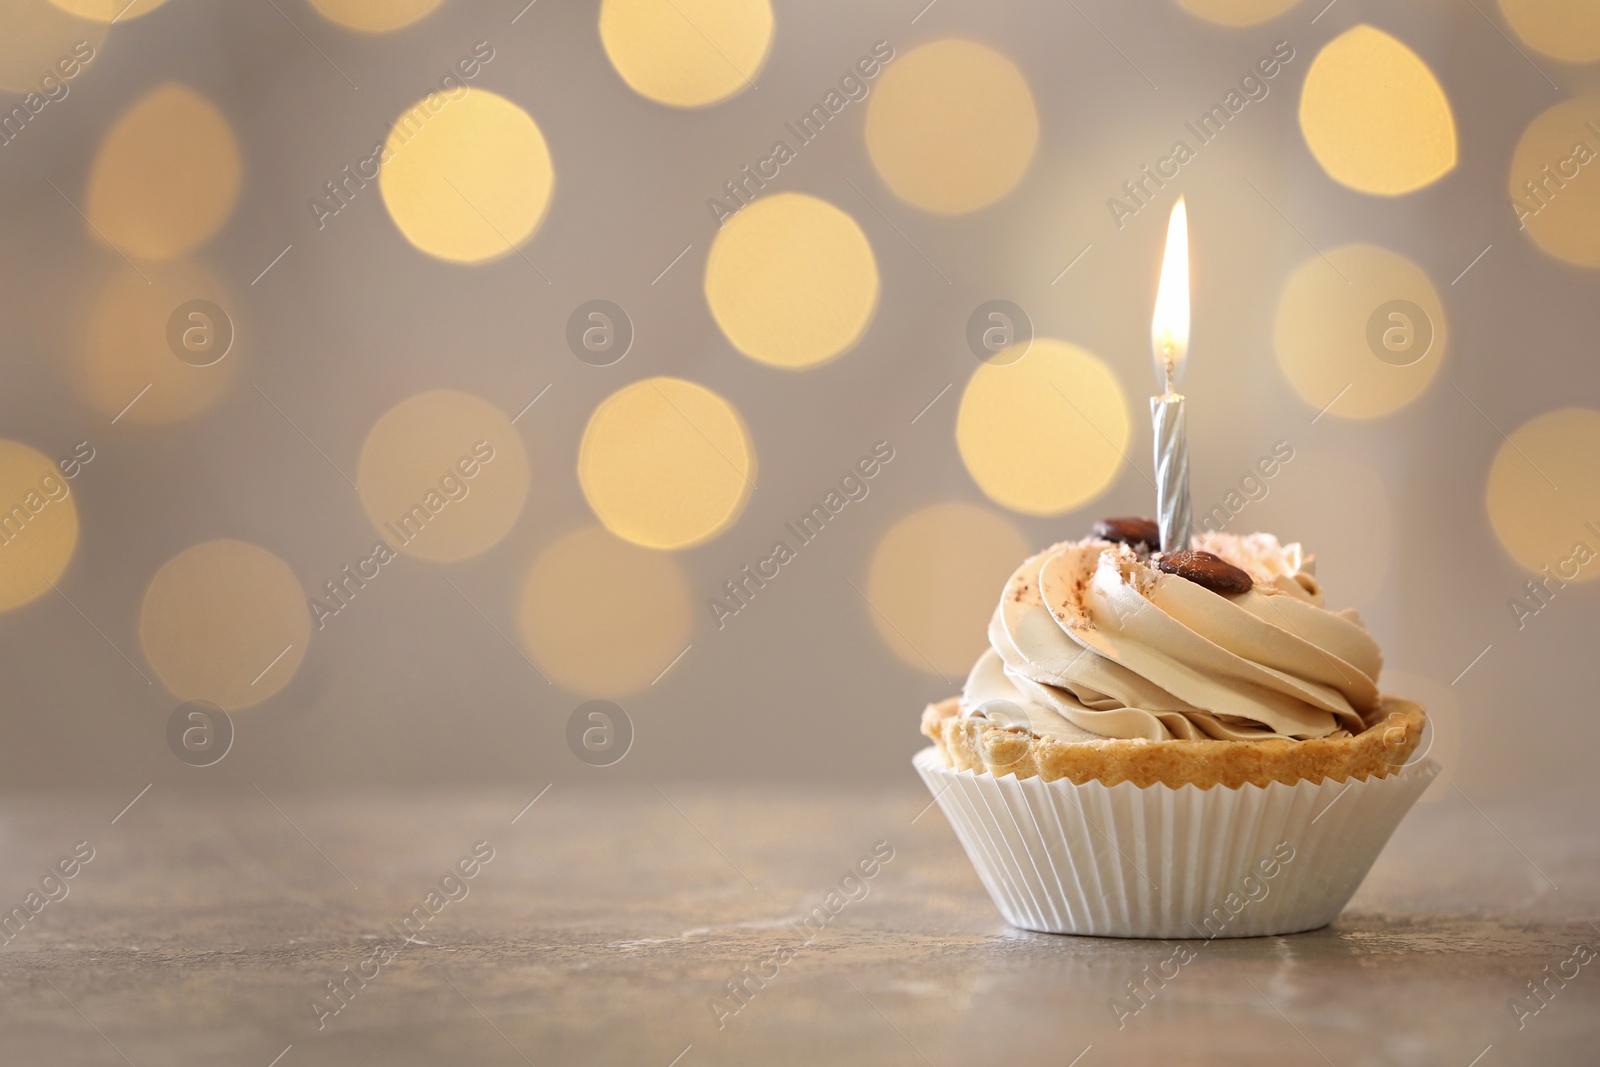 Photo of Tasty birthday cupcake with candle on table against blurred lights, space for text